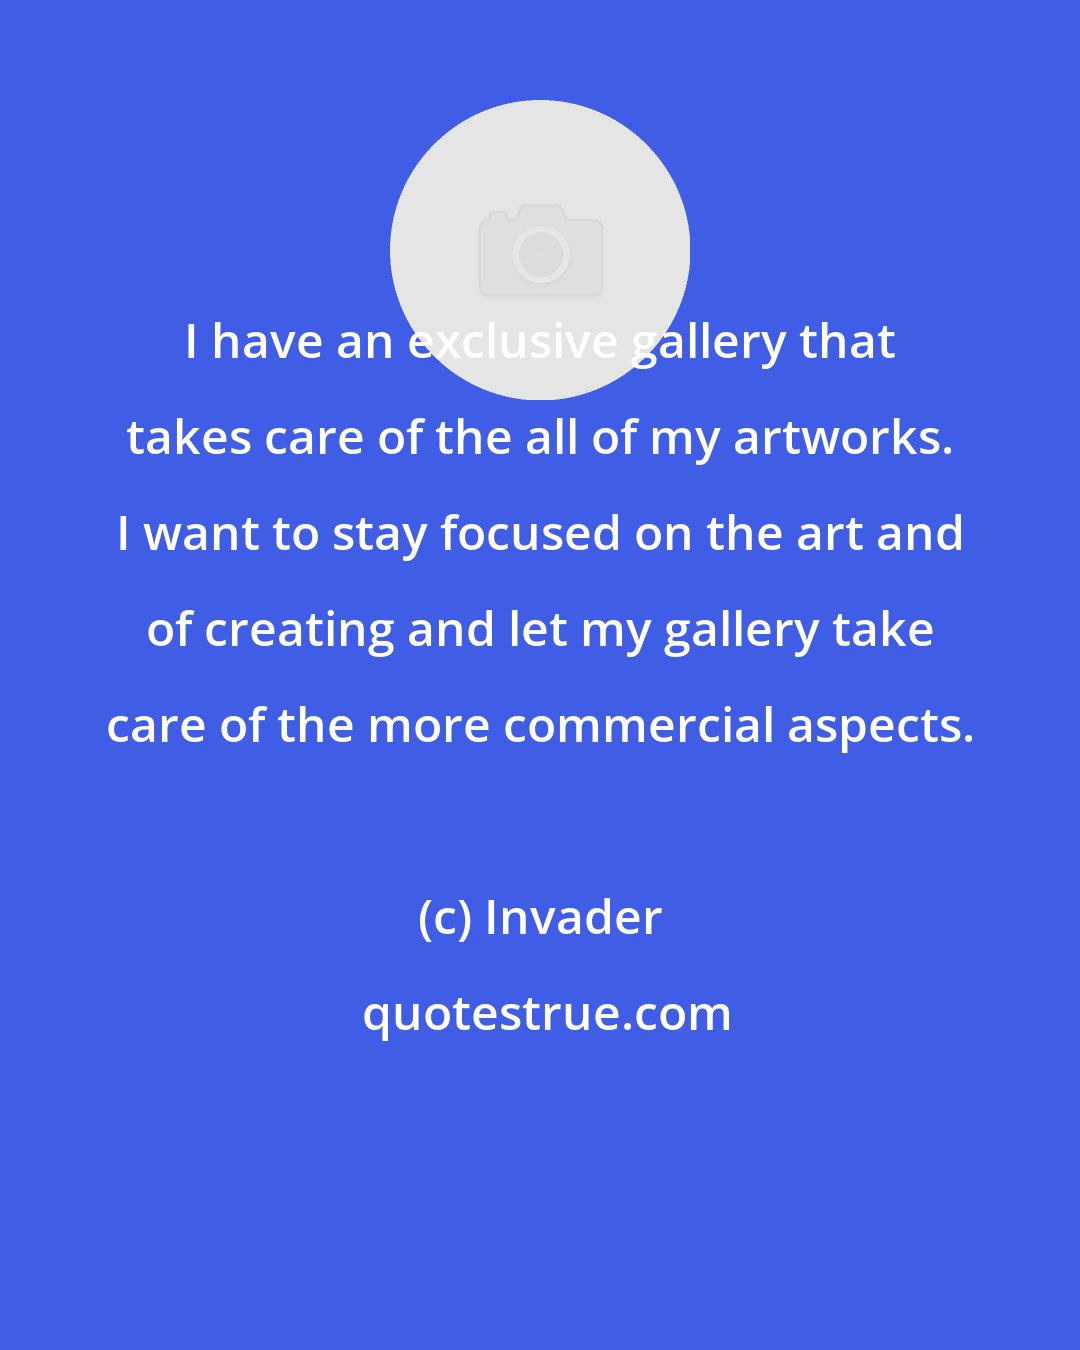 Invader: I have an exclusive gallery that takes care of the all of my artworks. I want to stay focused on the art and of creating and let my gallery take care of the more commercial aspects.